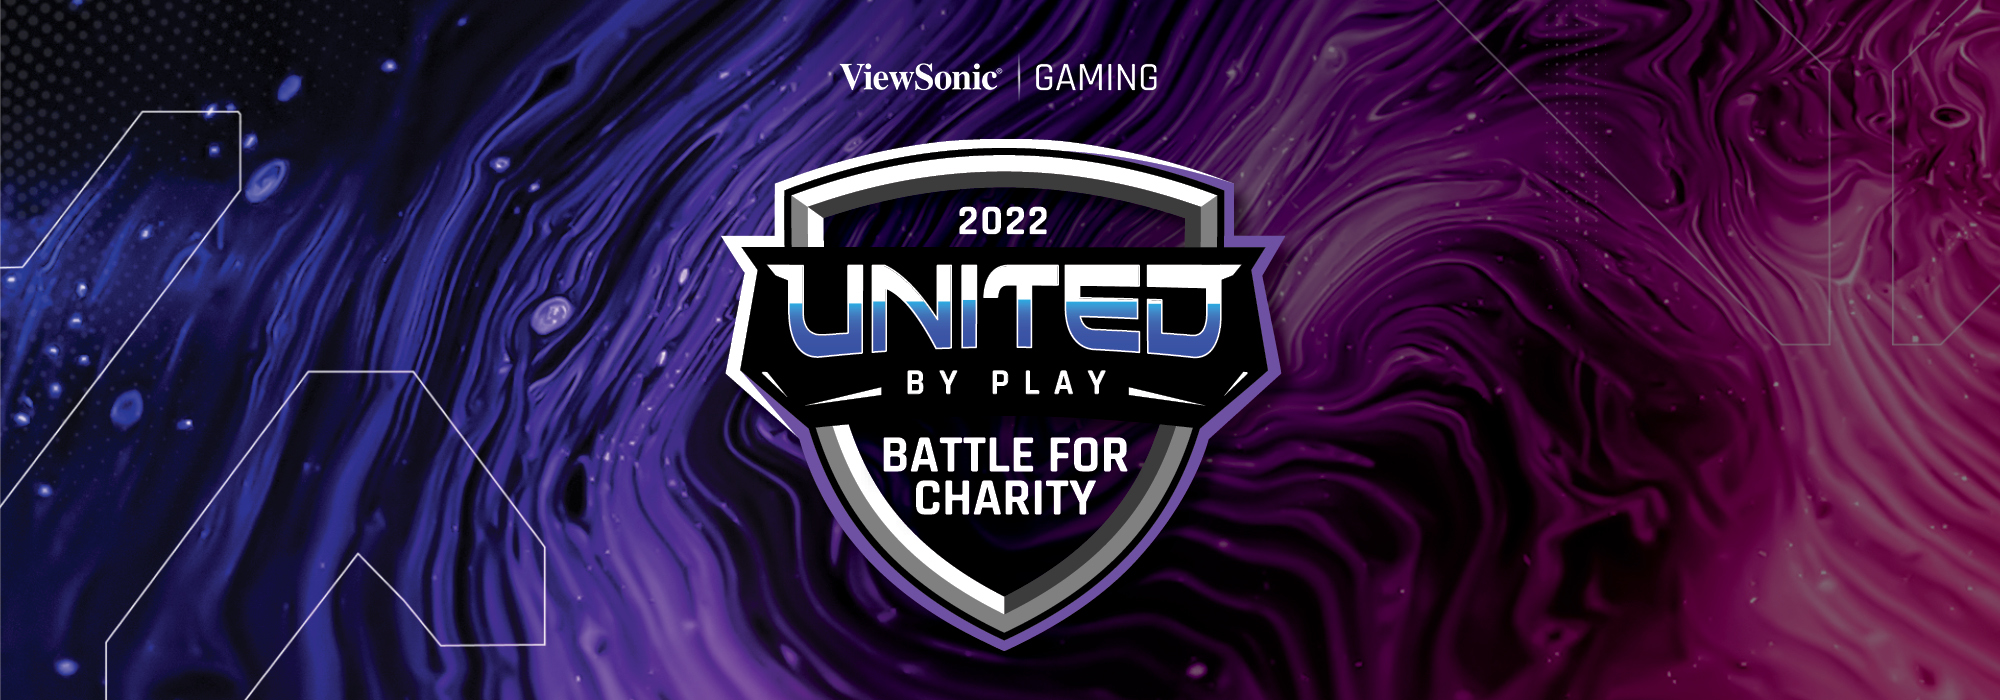 ViewSonic Kicks Off its United by Play Initiative with In-Person “Valorant” Charity Gaming Tournament on January 5, 2022 in Las Vegas